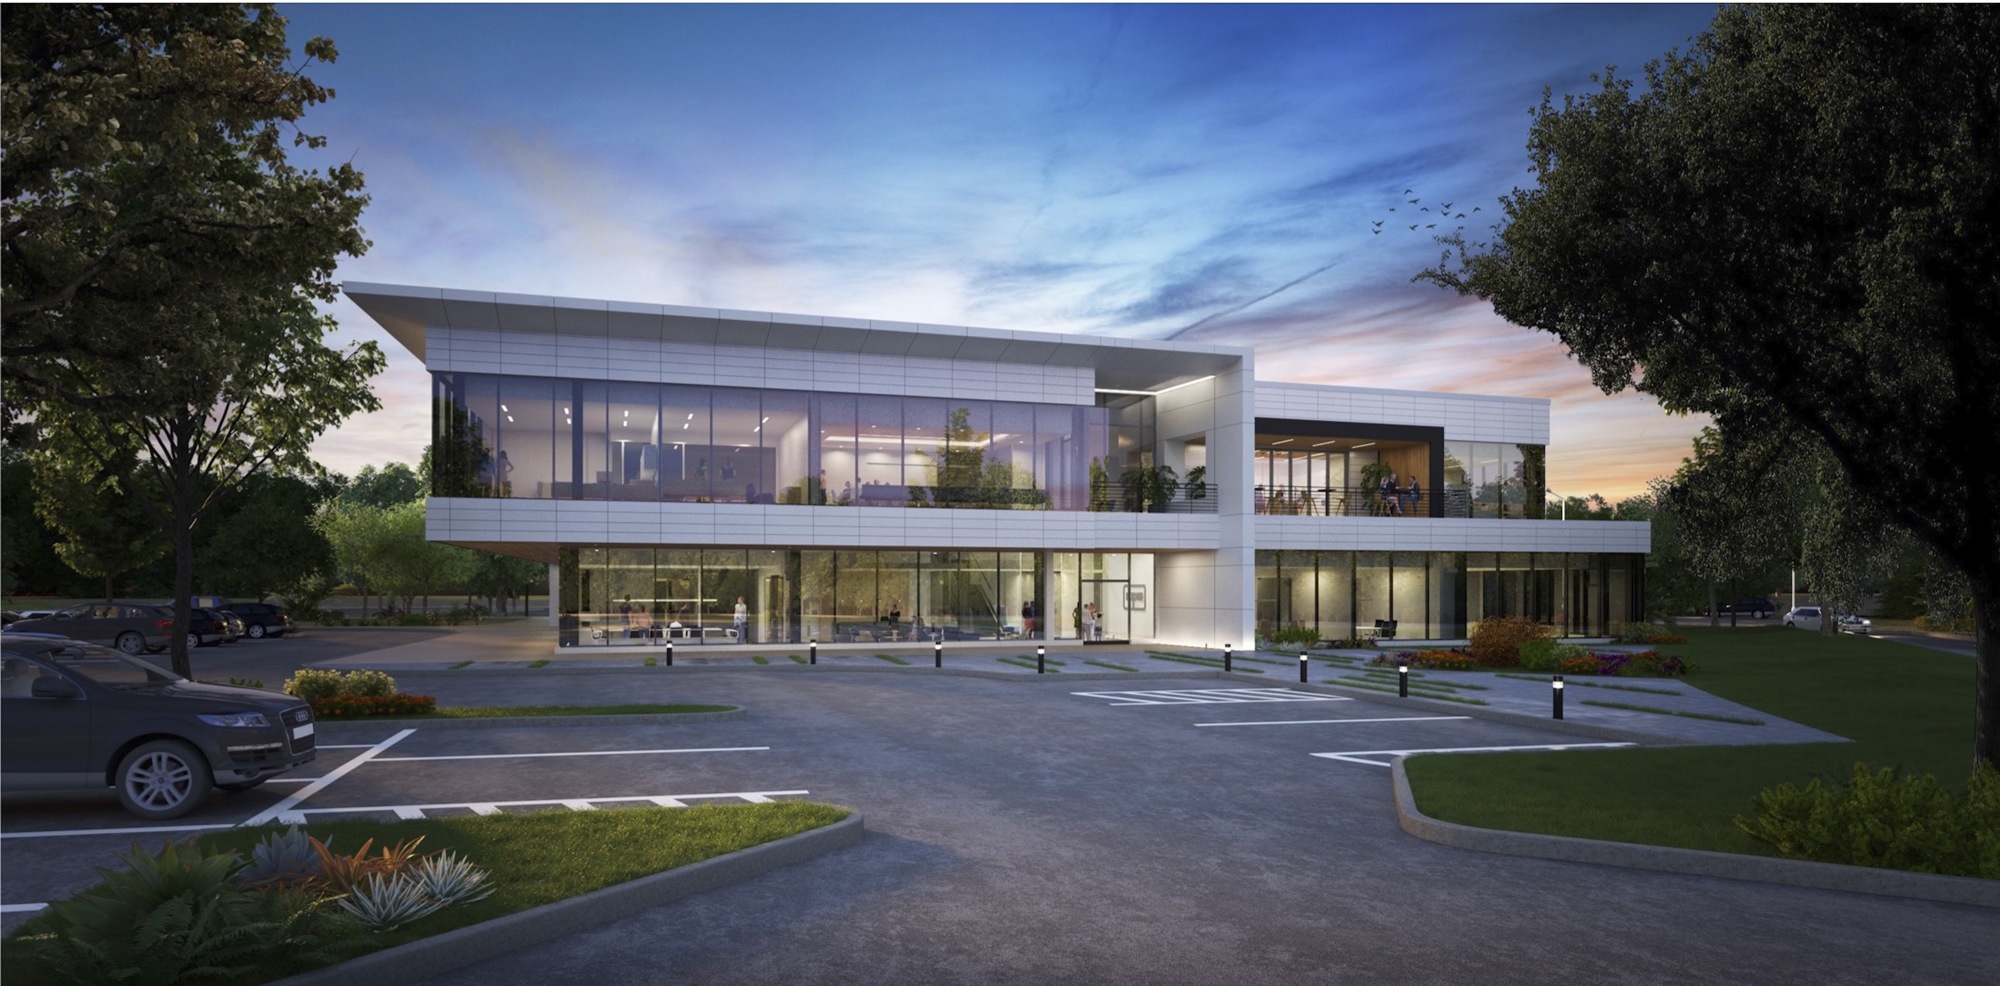 Roper Technologies will be located in a 42,000-square-foot office building in Center Point.